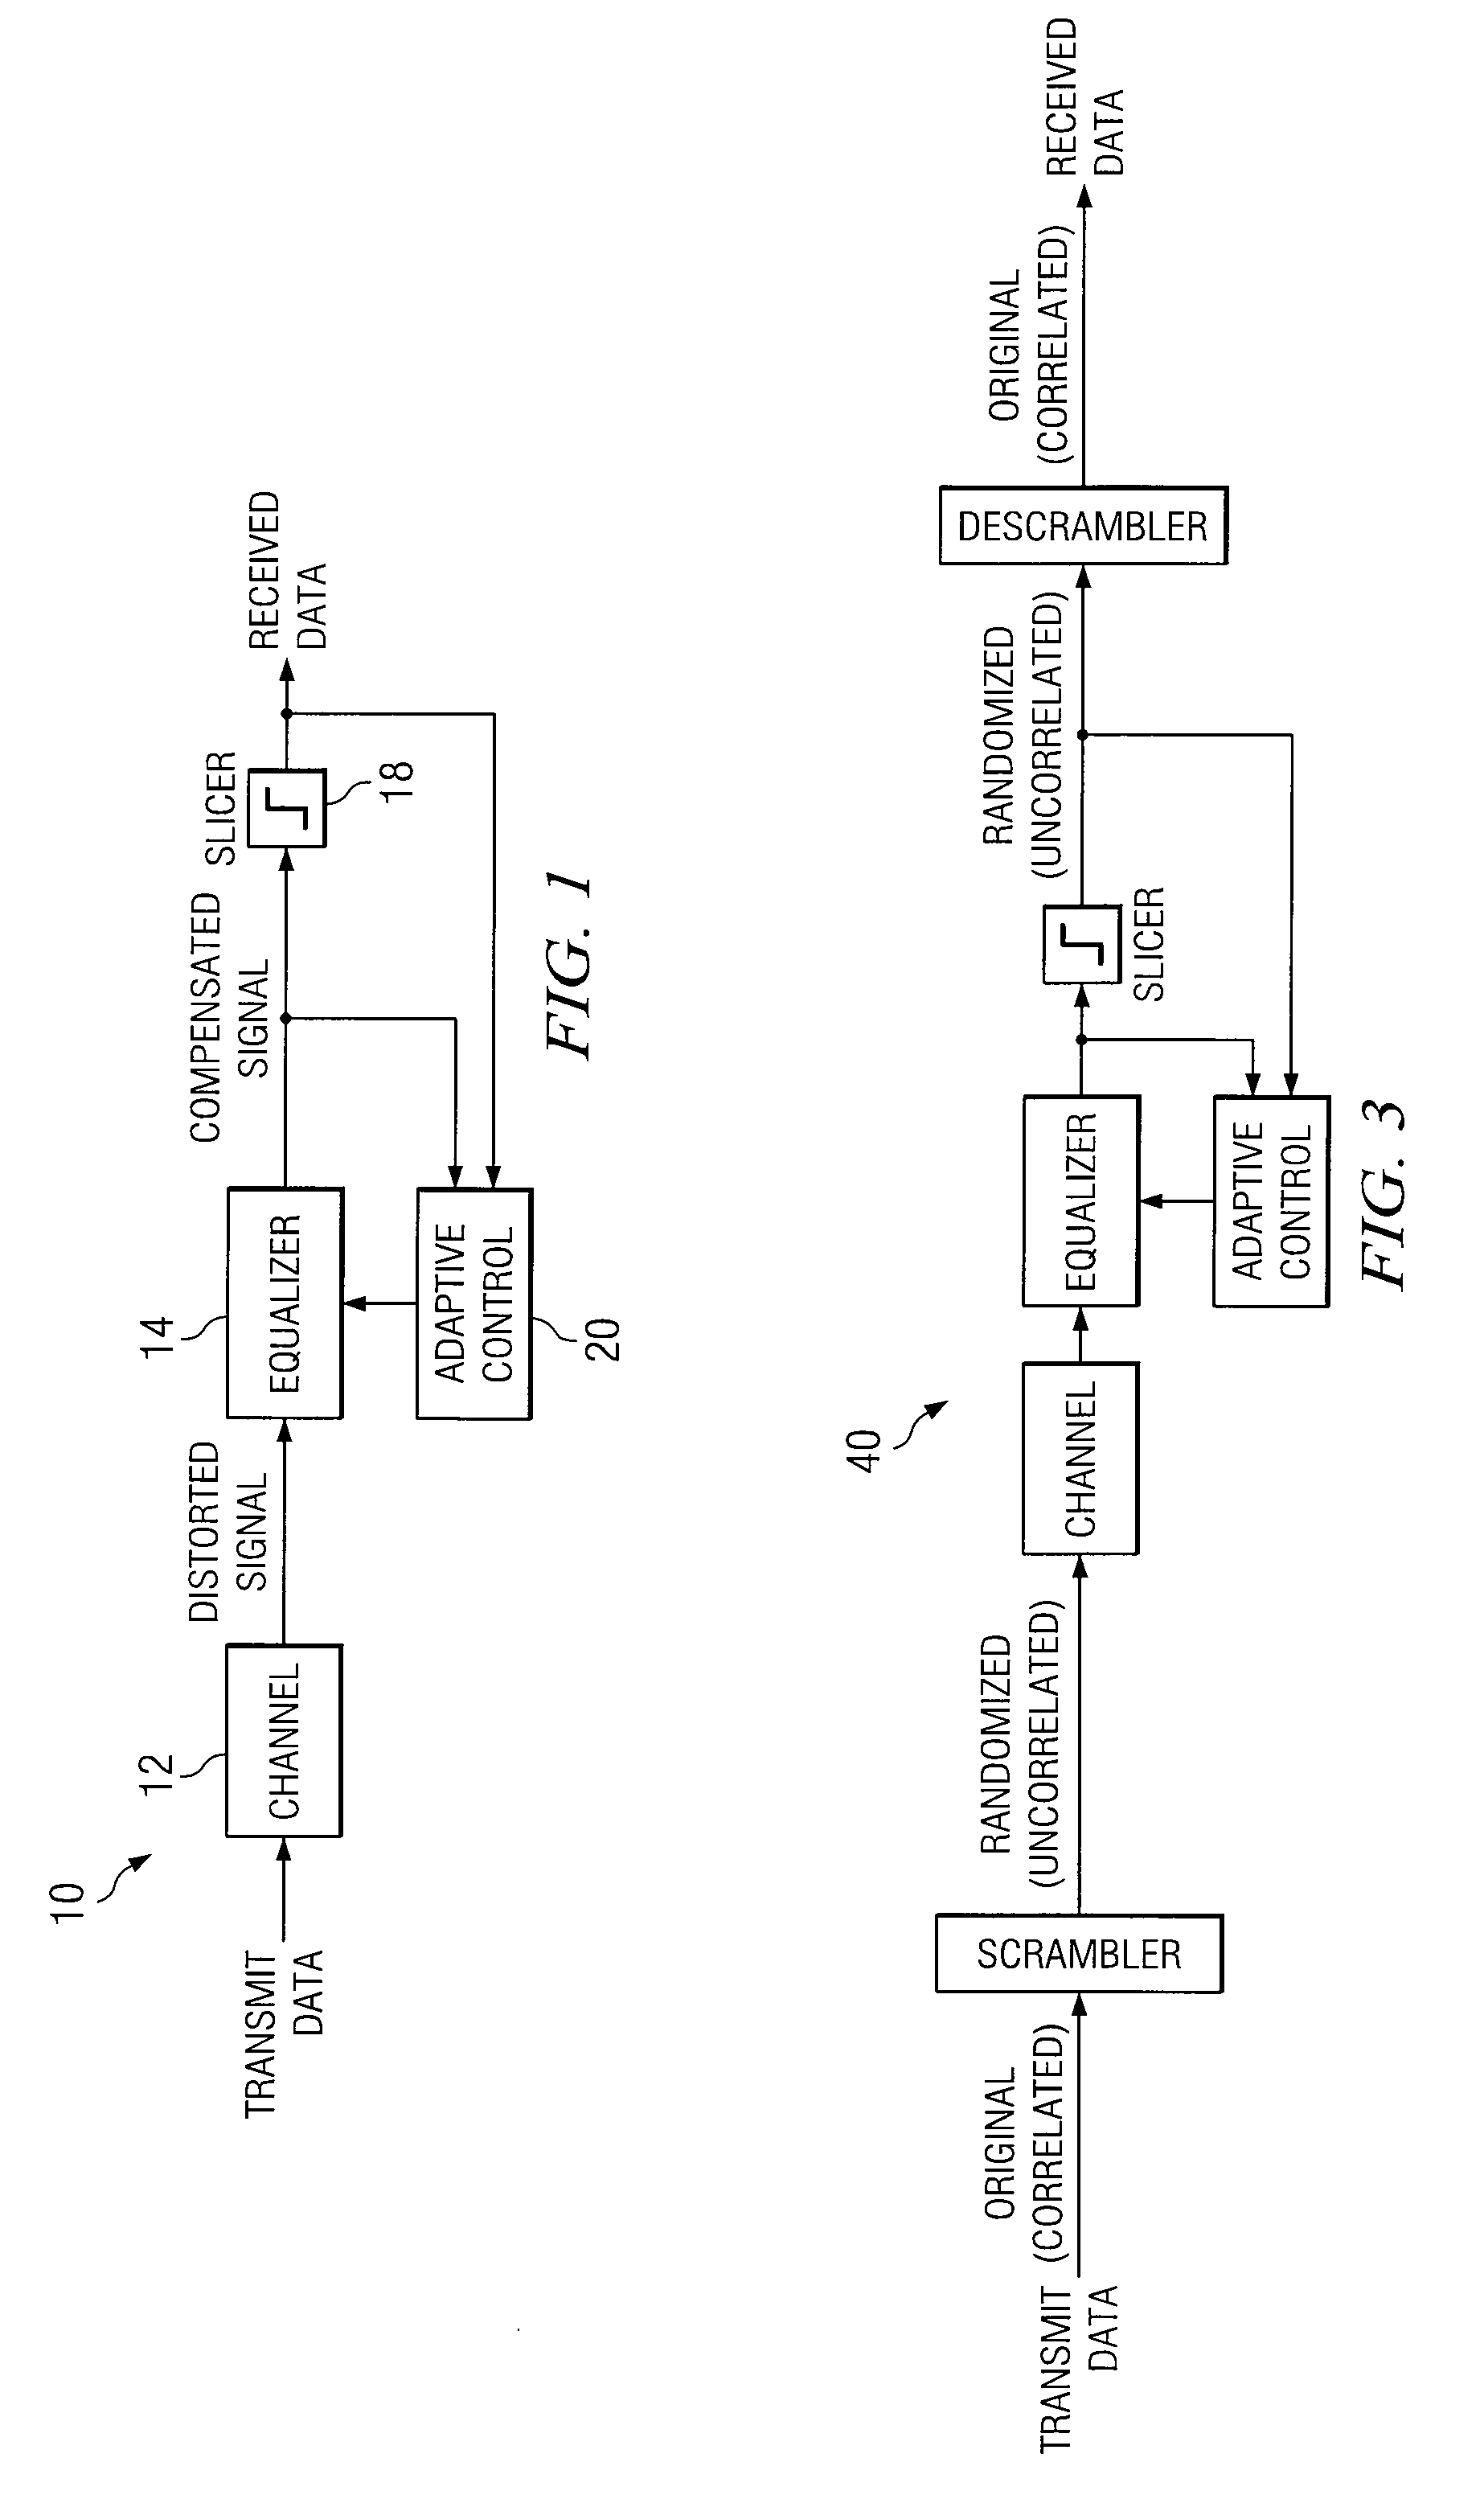 Method and system for on-line data-pattern compensated adaptive equalizer control